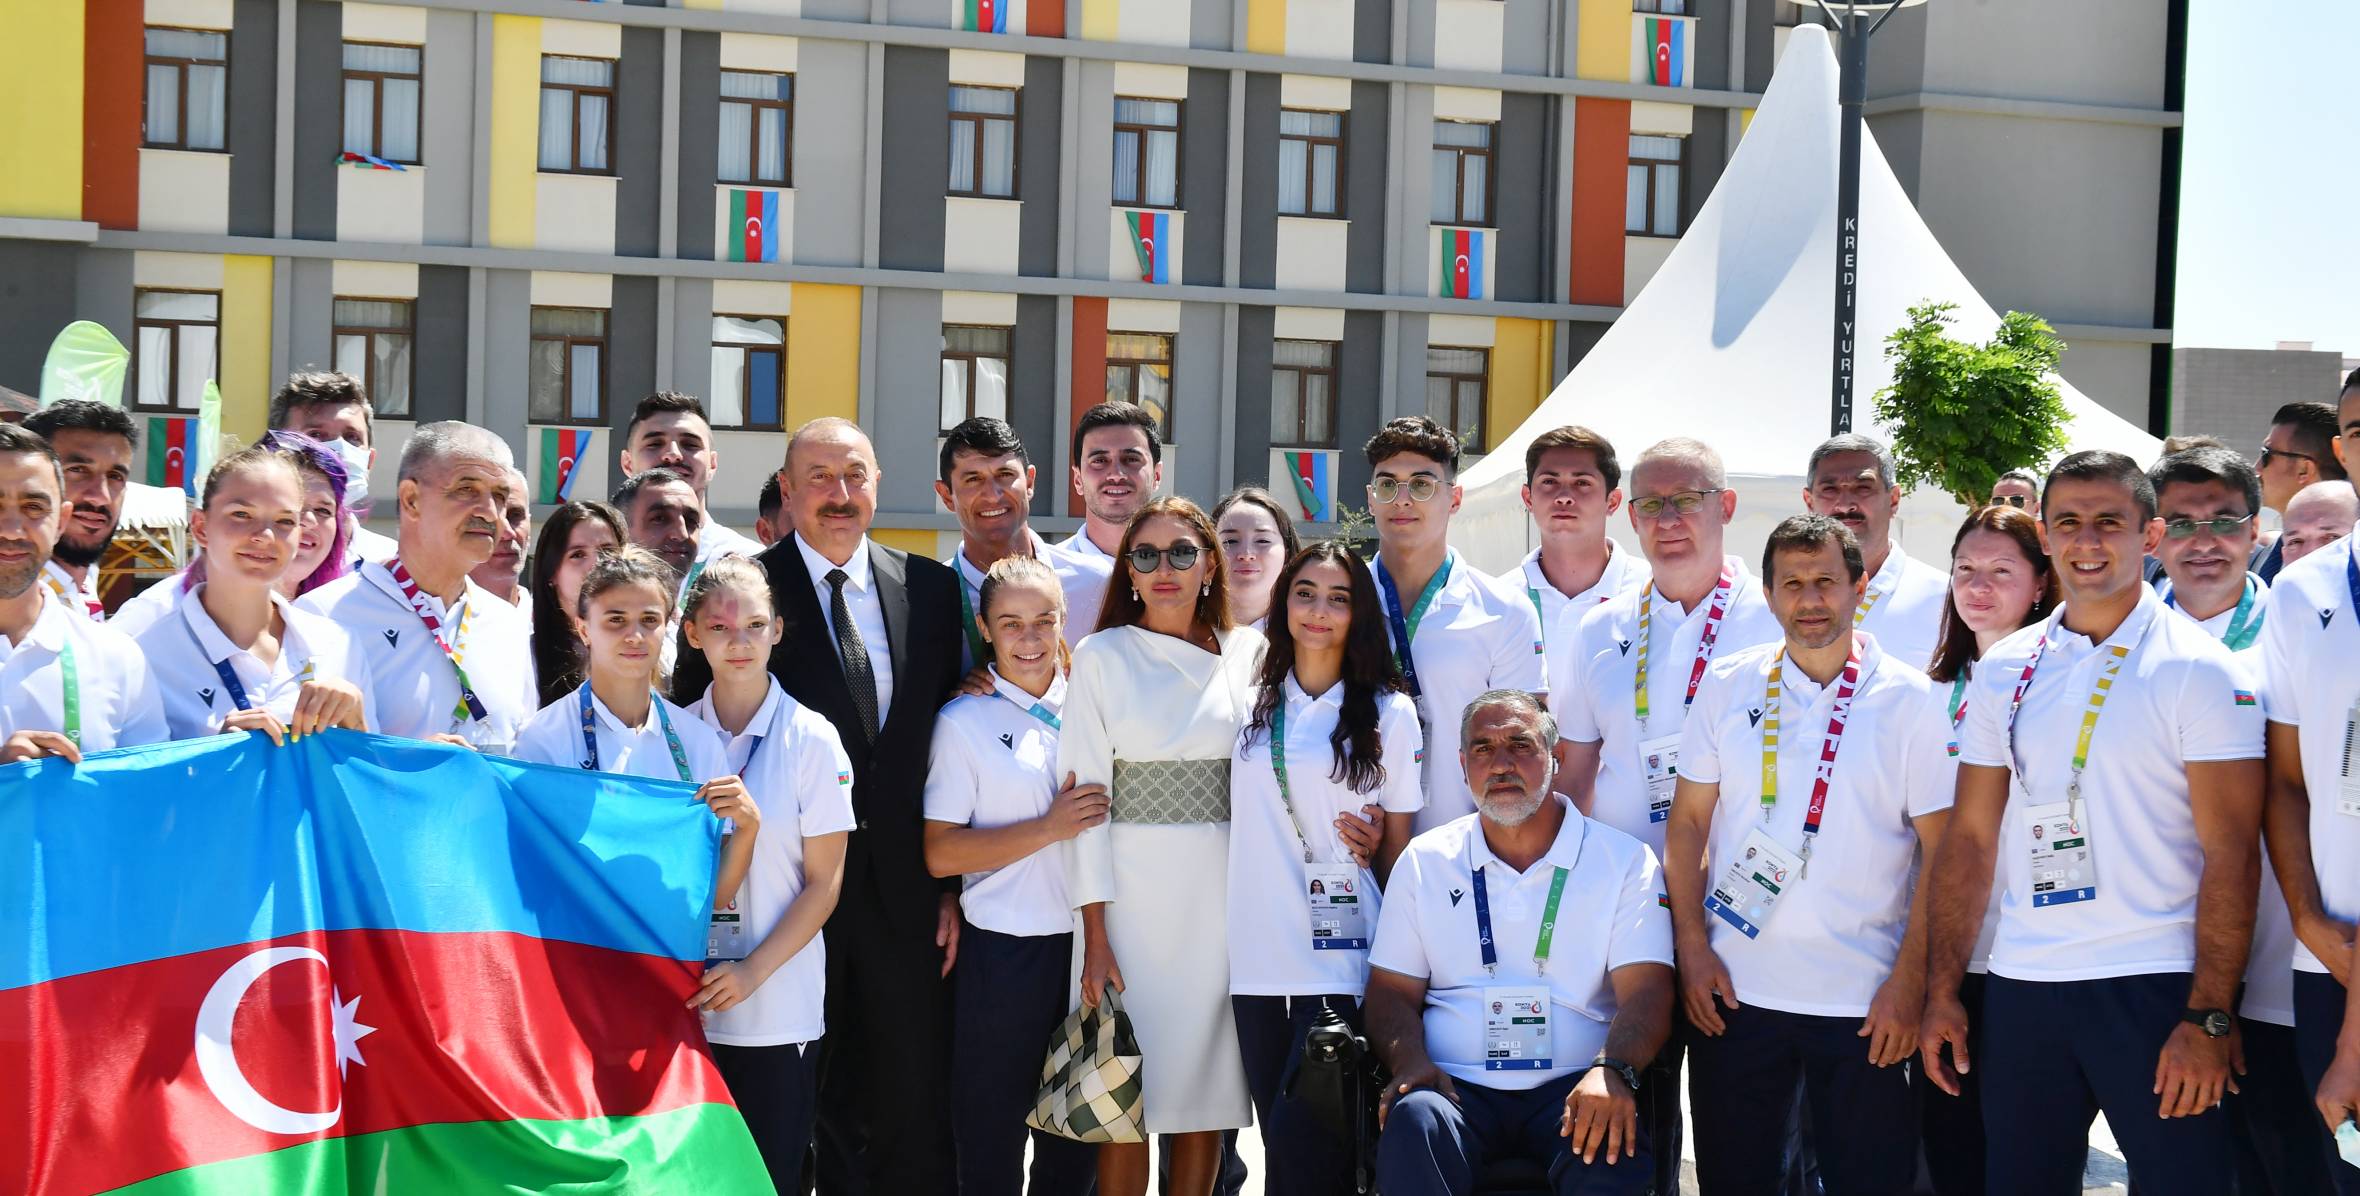 Ilham Aliyev and First Lady Mehriban Aliyeva have met with athletes representing the country at the 5th Islamic Solidarity Games